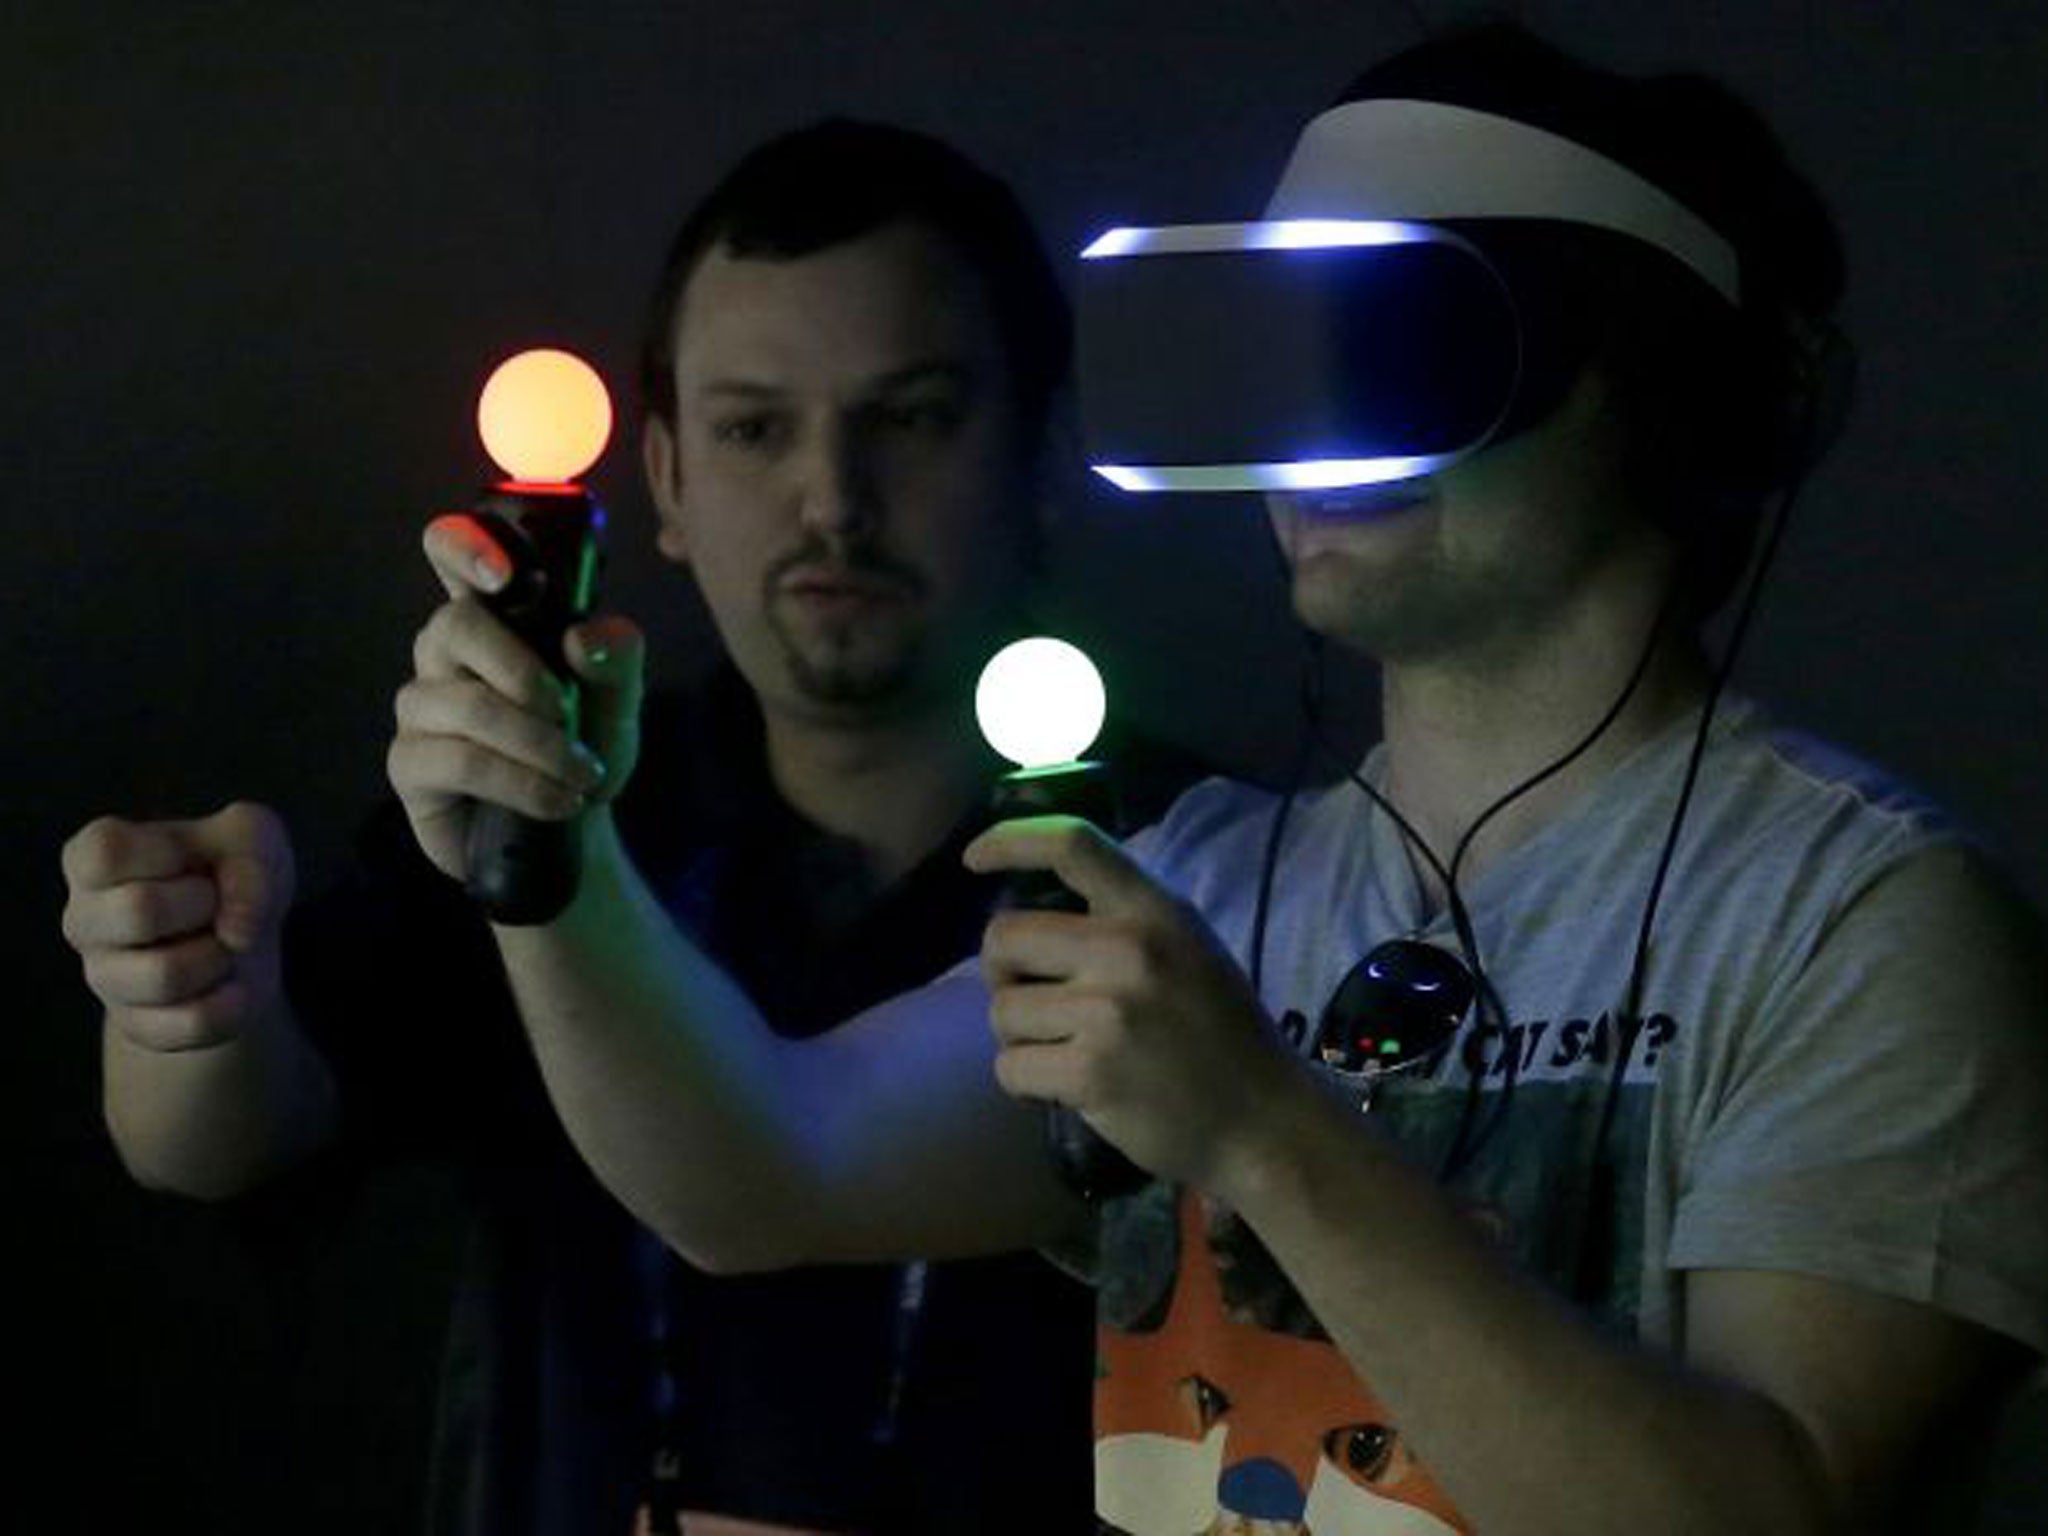 A player tries out the earlier version of Project Morpheus